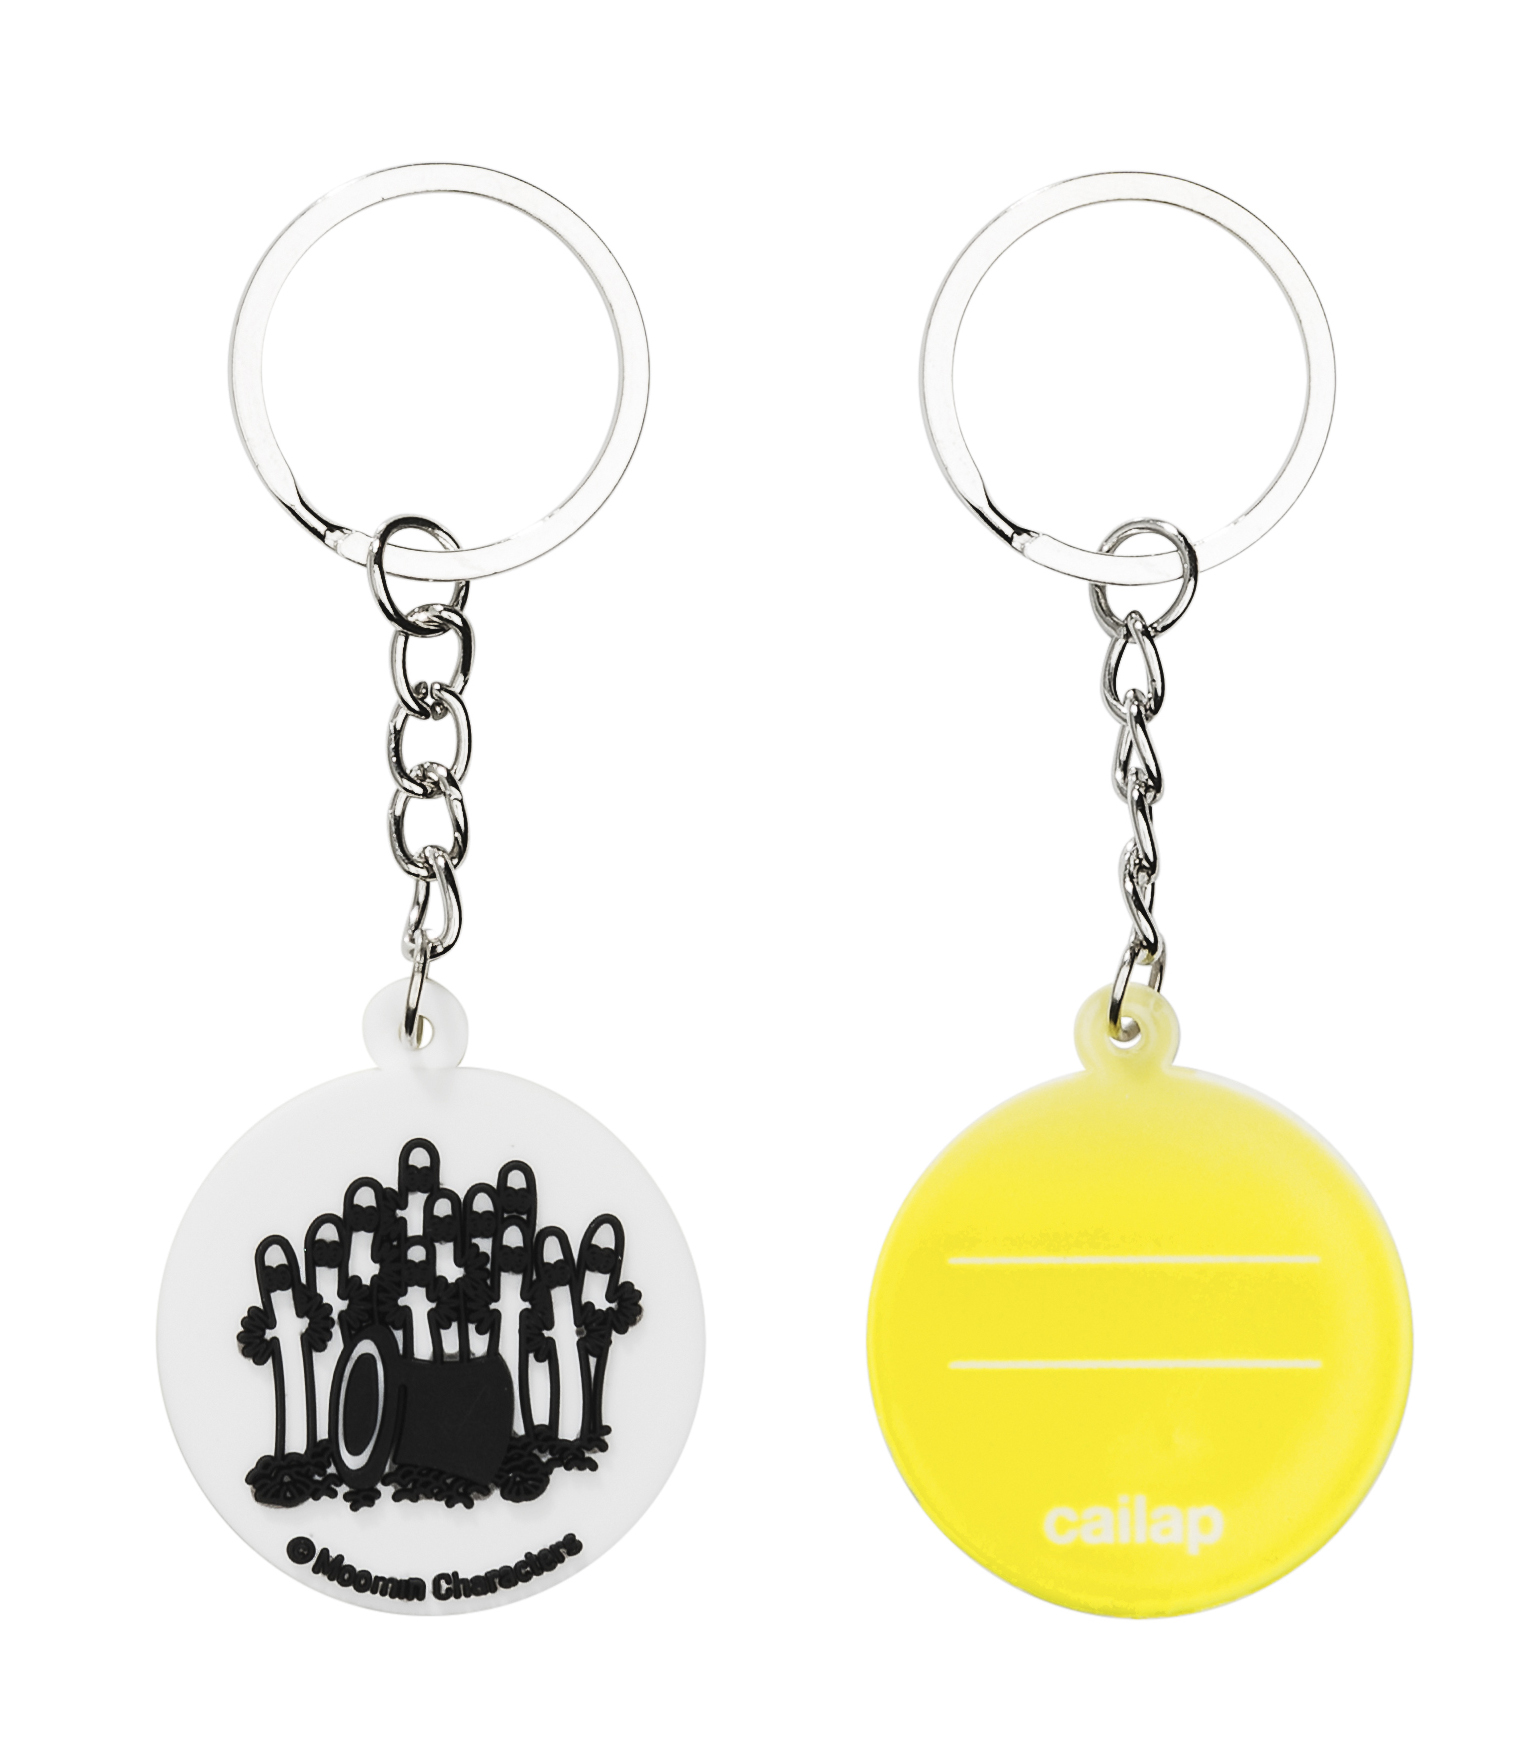 CAILAP KEY RING WITH HATTIFATTENERS 